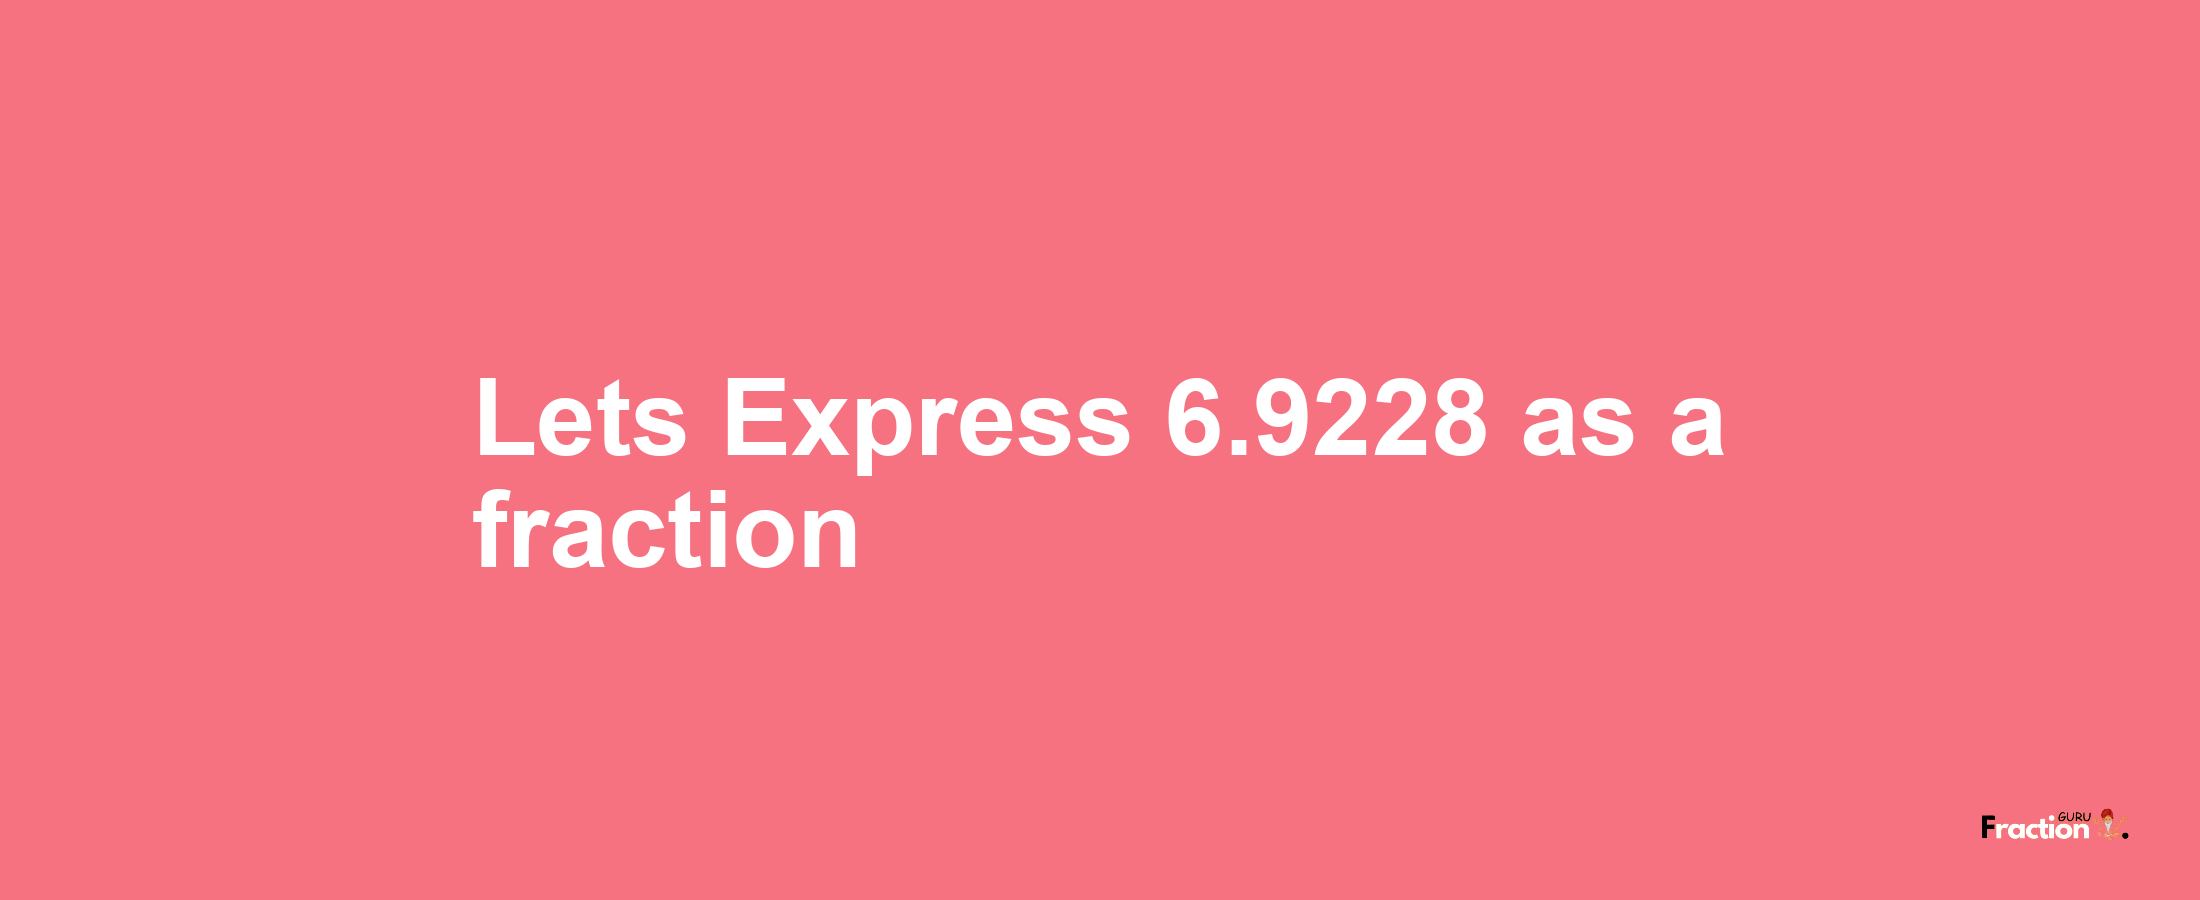 Lets Express 6.9228 as afraction